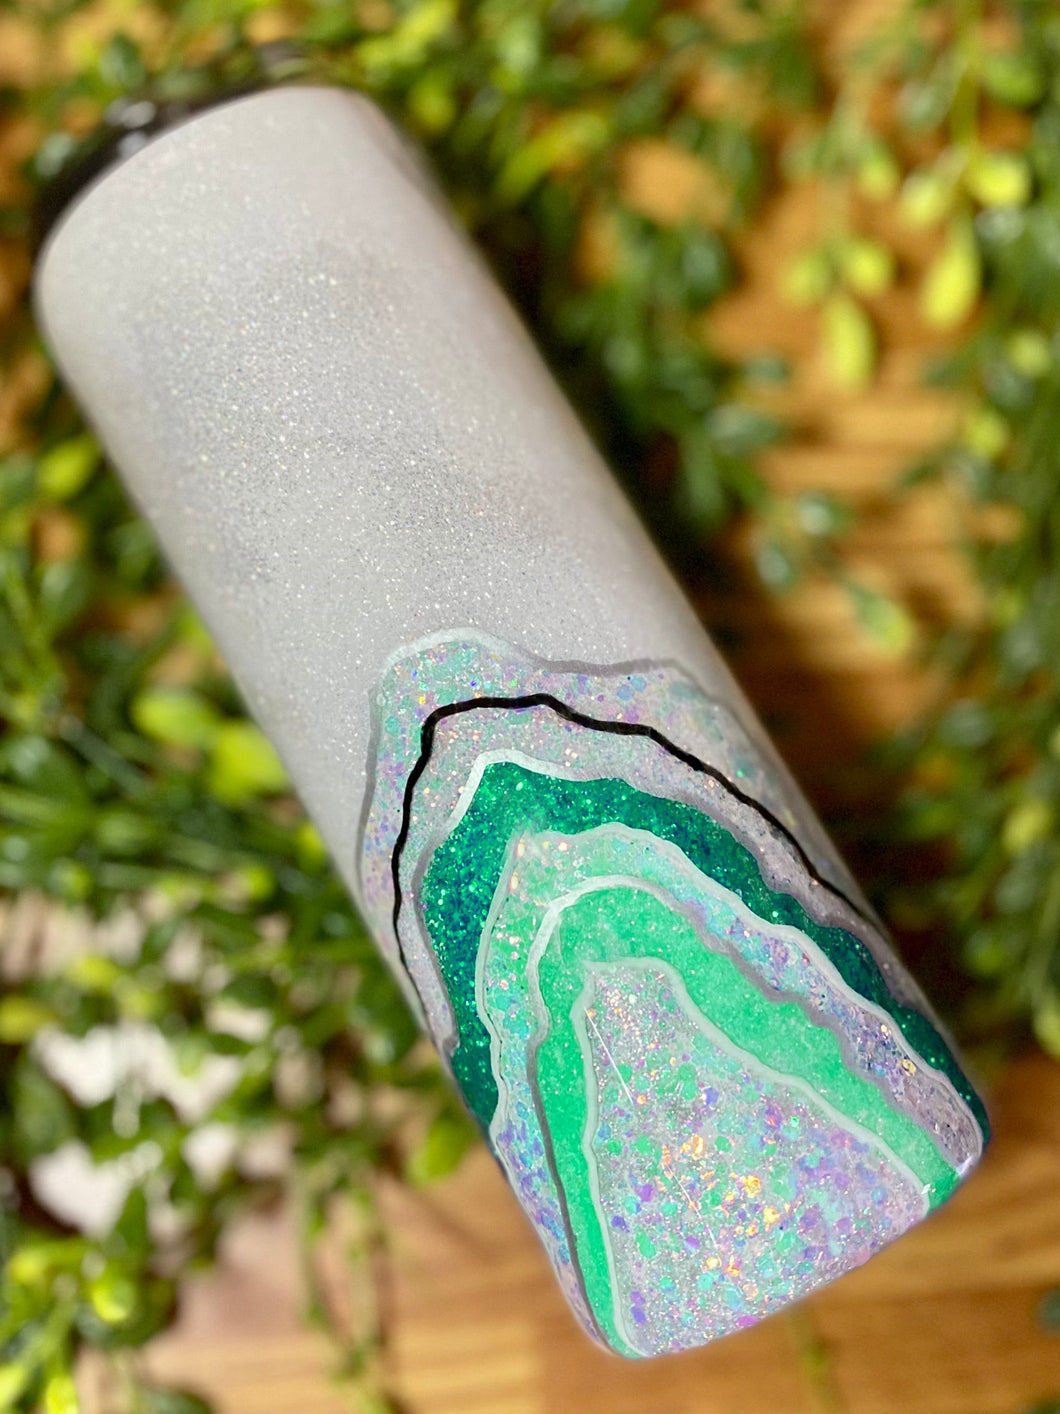 Adult GEODE Tumbler Paint & Sip Event March 15th 6pm-9pm